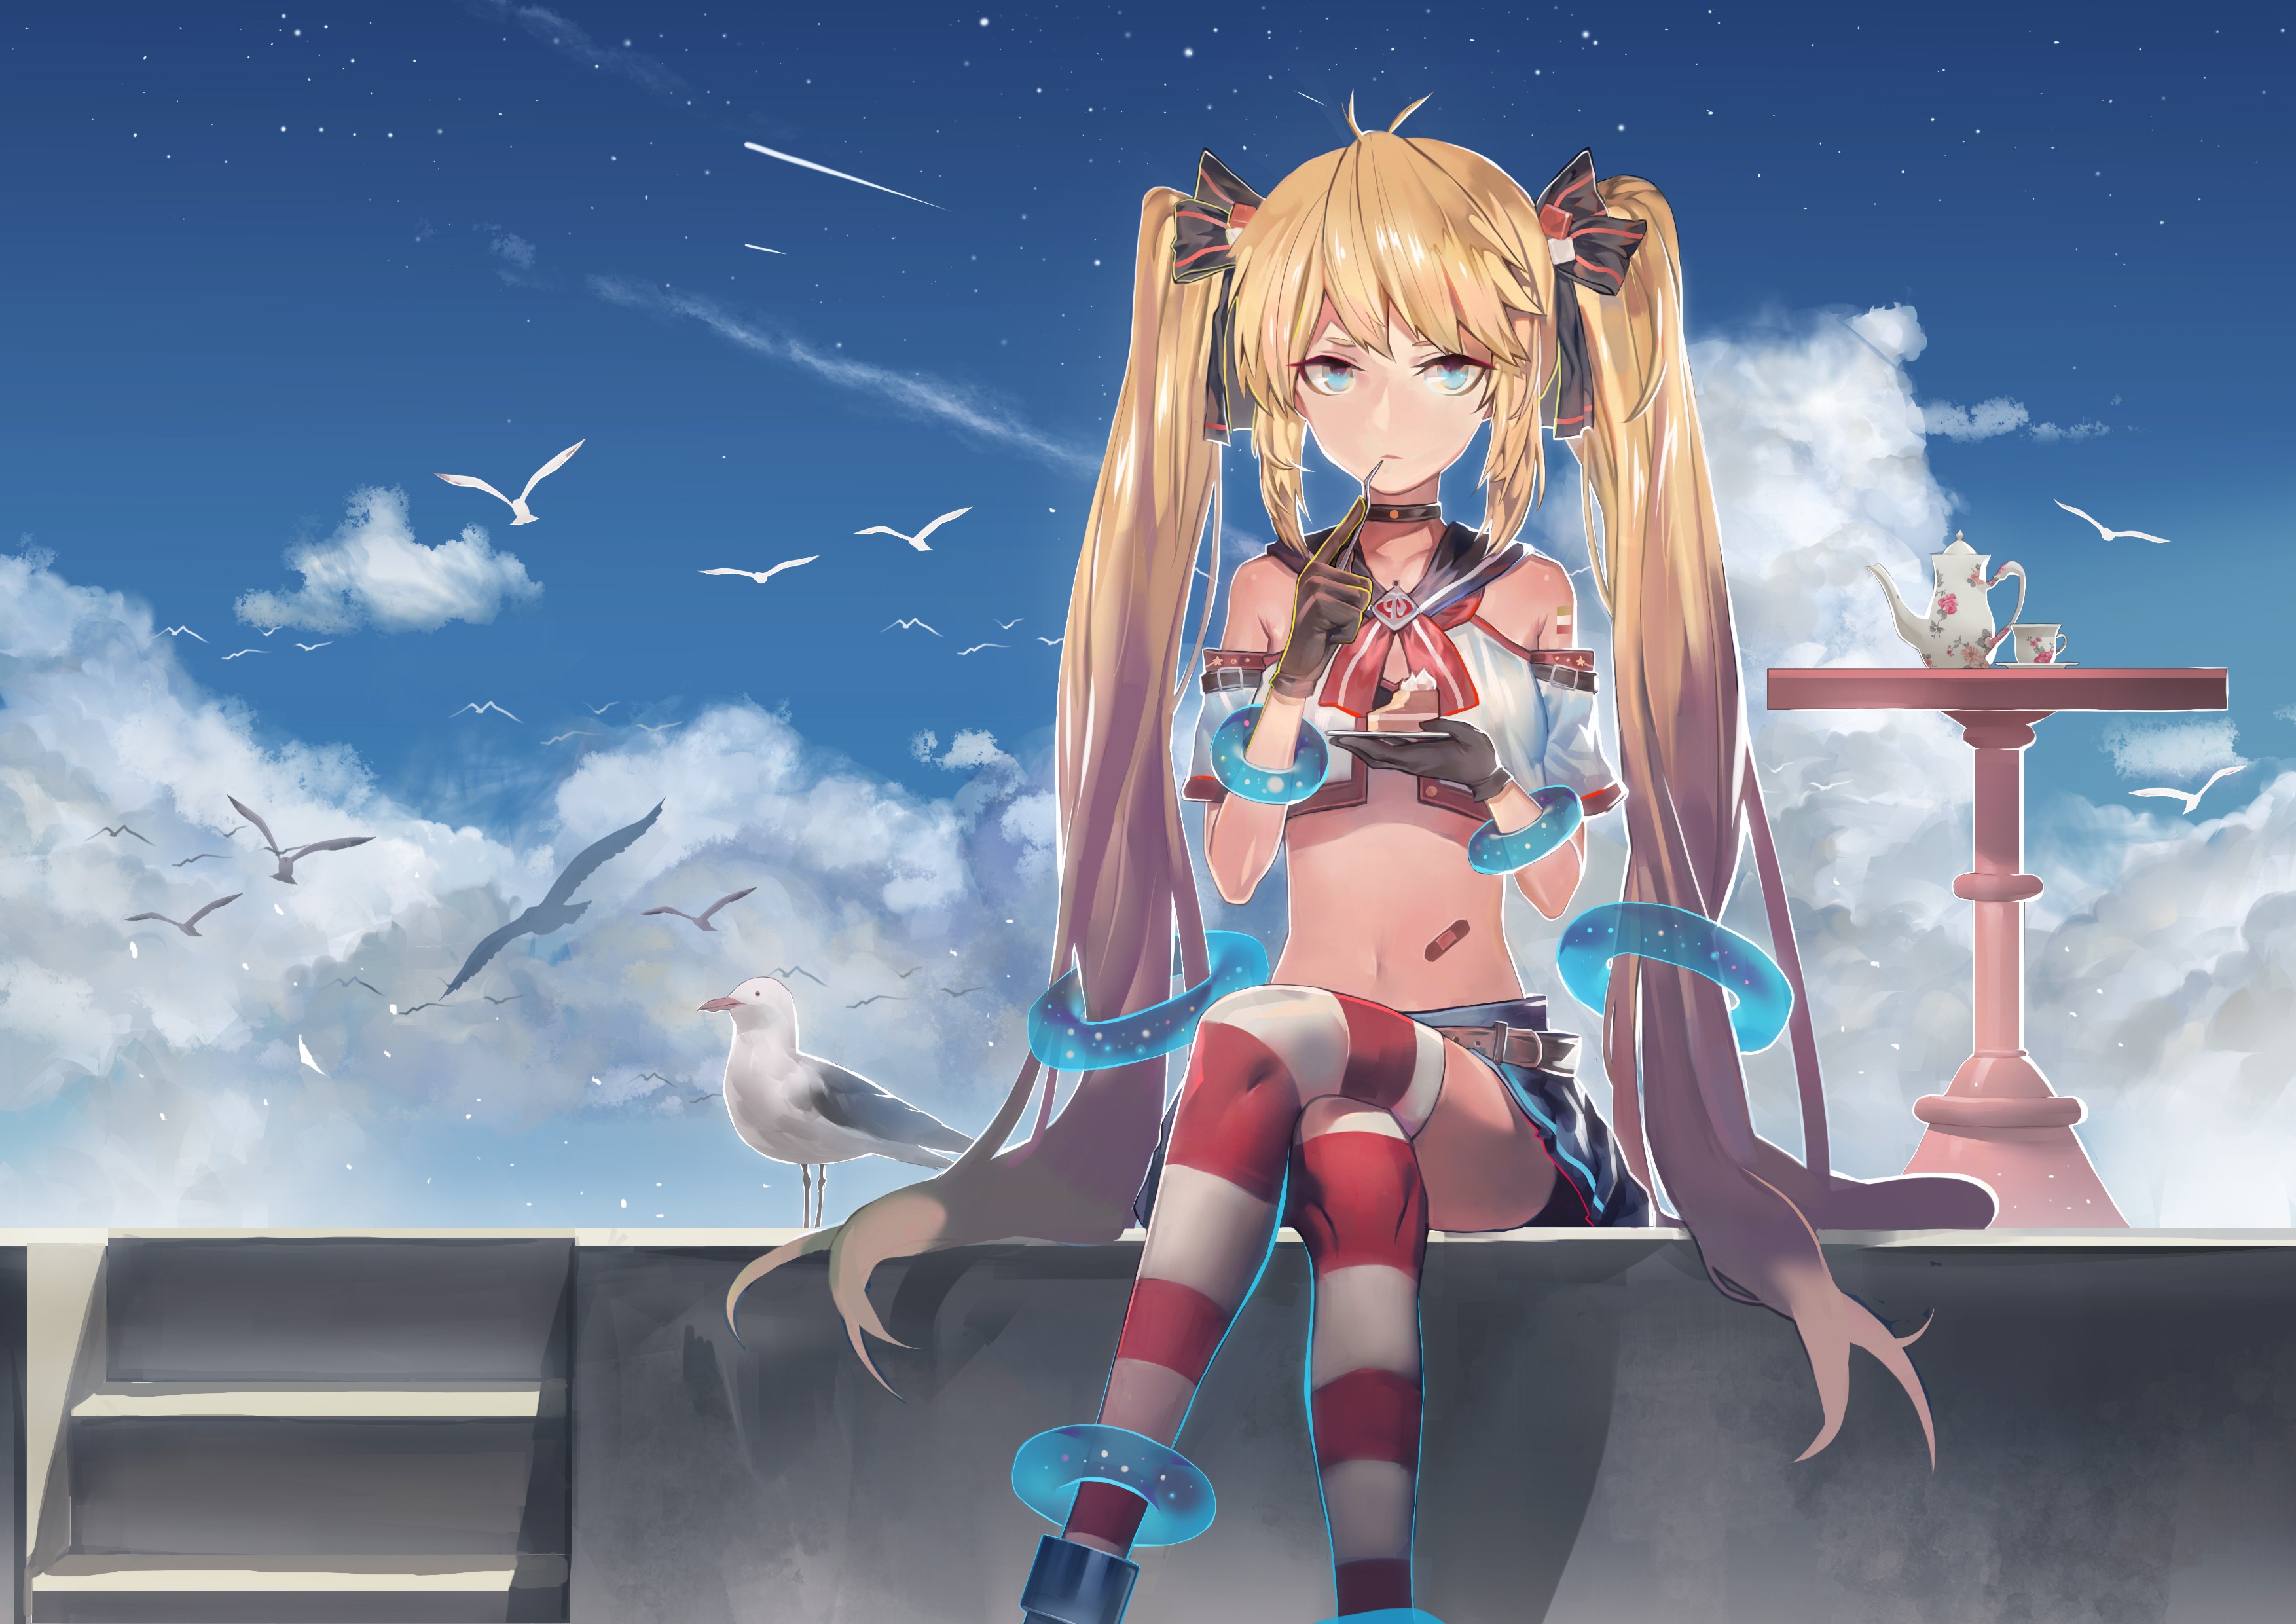 Anime 3507x2480 anime anime girls Zhanjian Shaonu birds clouds gloves long hair blonde twintails thigh-highs legs crossed striped stockings stockings Pixiv food sitting sky